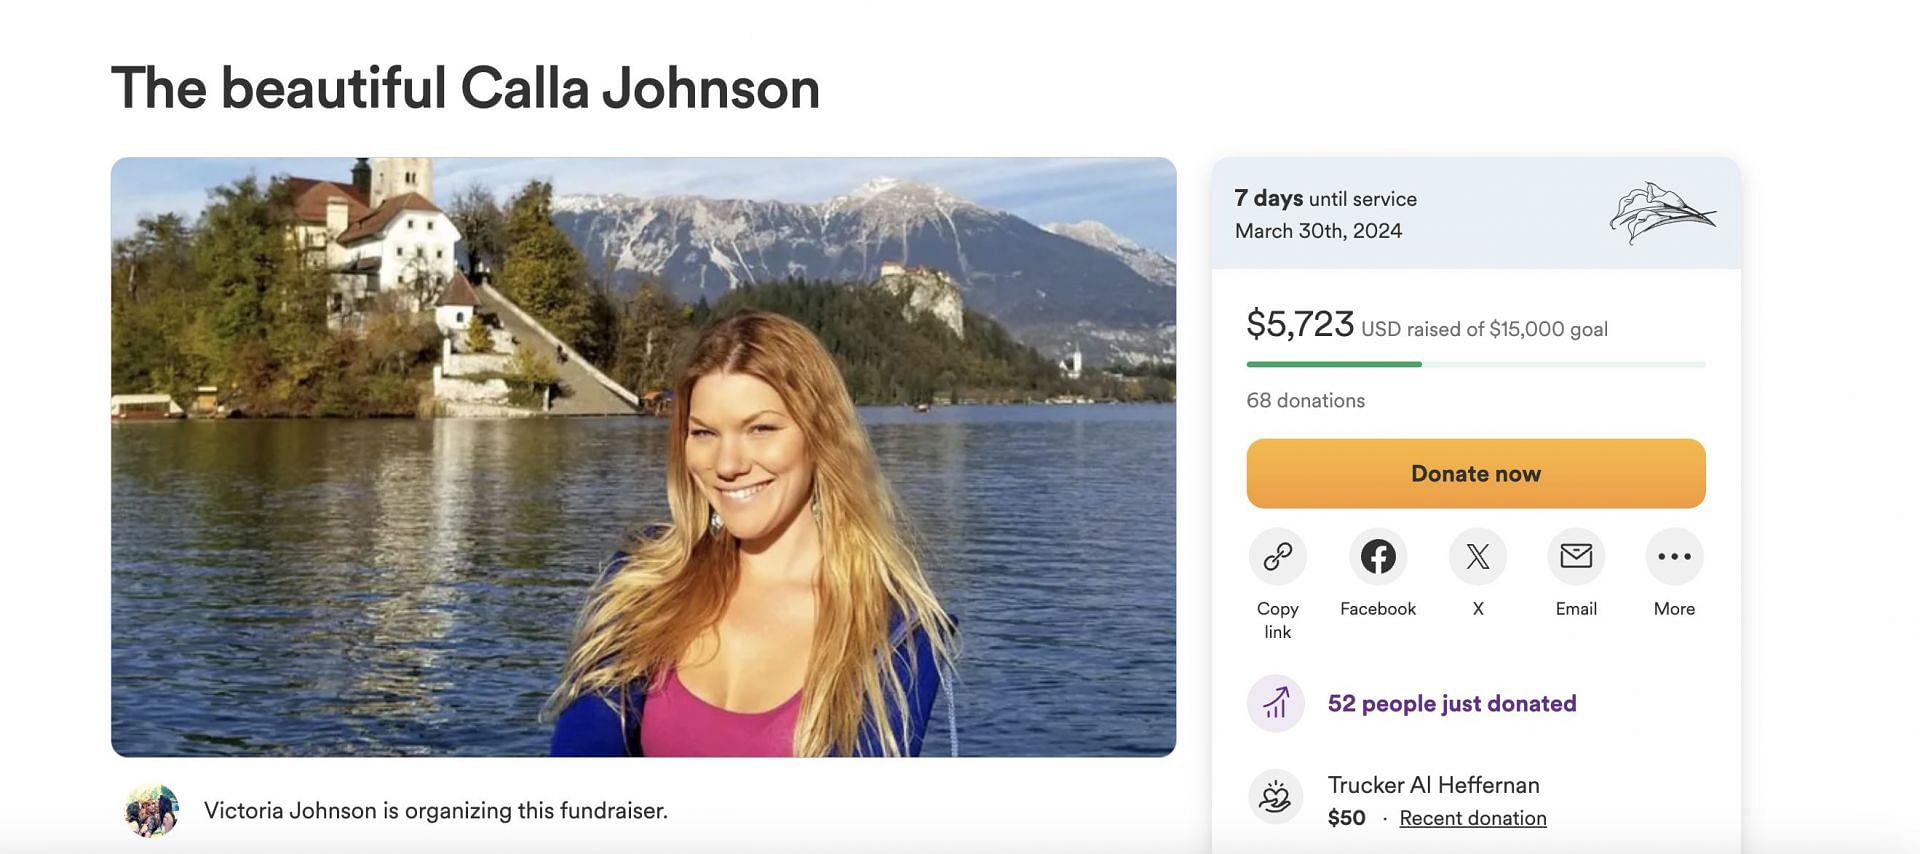 Fundraiser for Calla collects more than $5,000 for her funeral as the TikToker tragically passes away at the age of 34. (Image via GoFundMe)